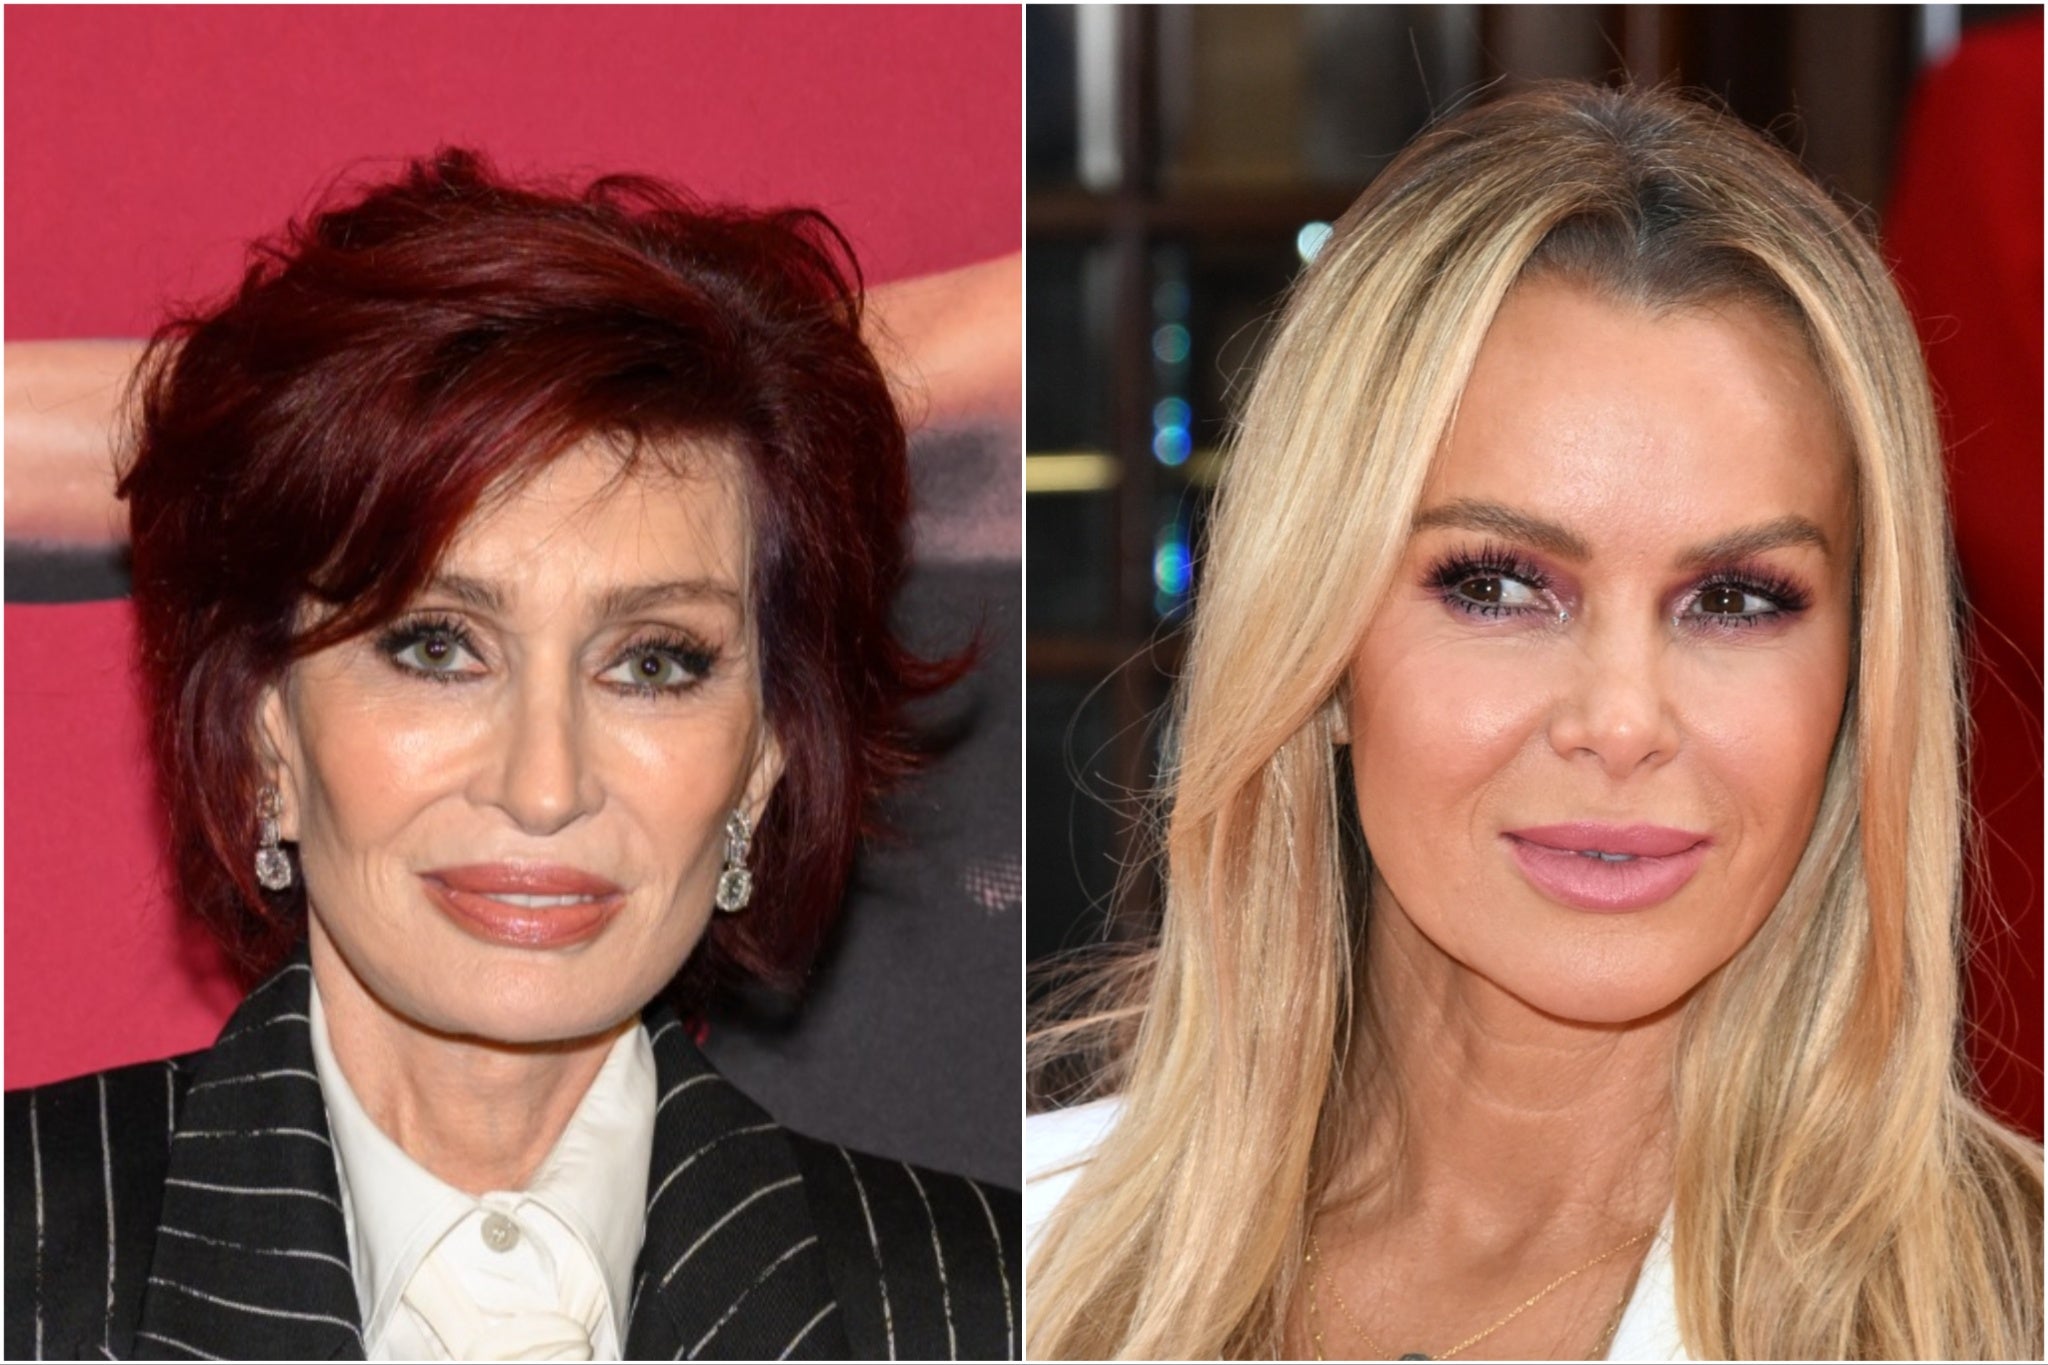 Sharon Osbourne publicly addressed Amanda Holden for an interview she gave to The Daily Mail